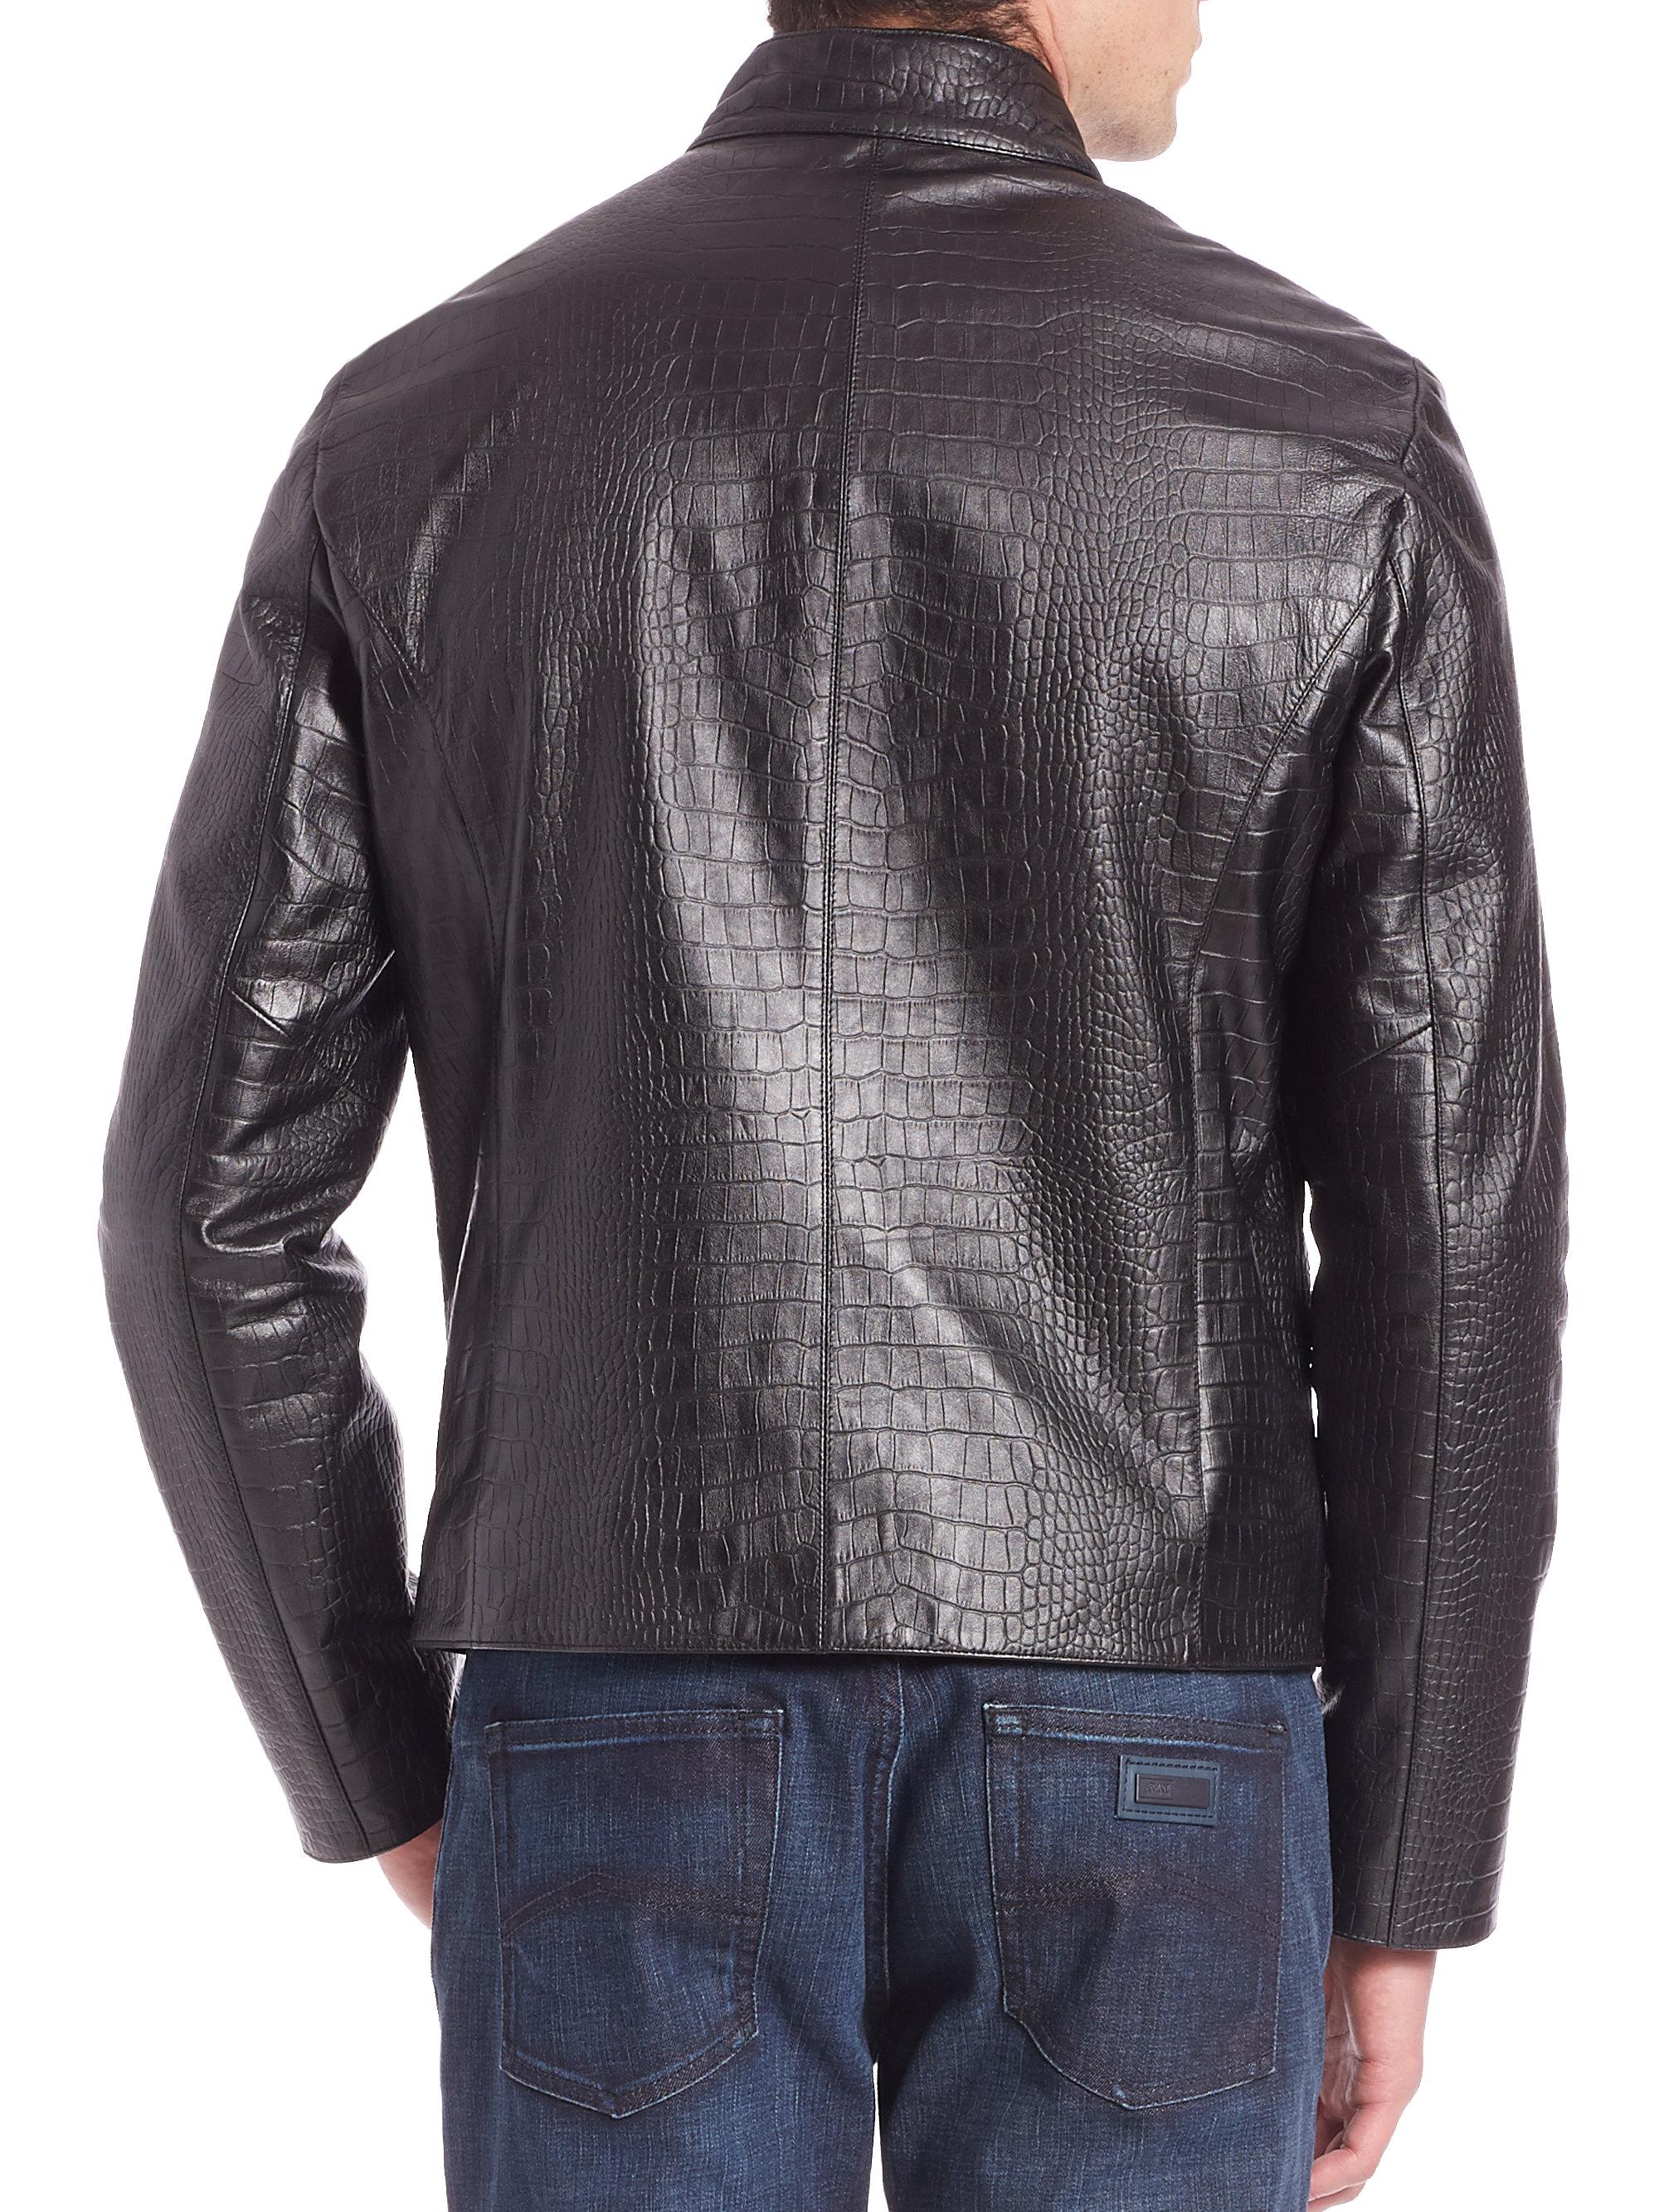 Lyst - Armani Croc-embossed Leather Jacket in Black for Men